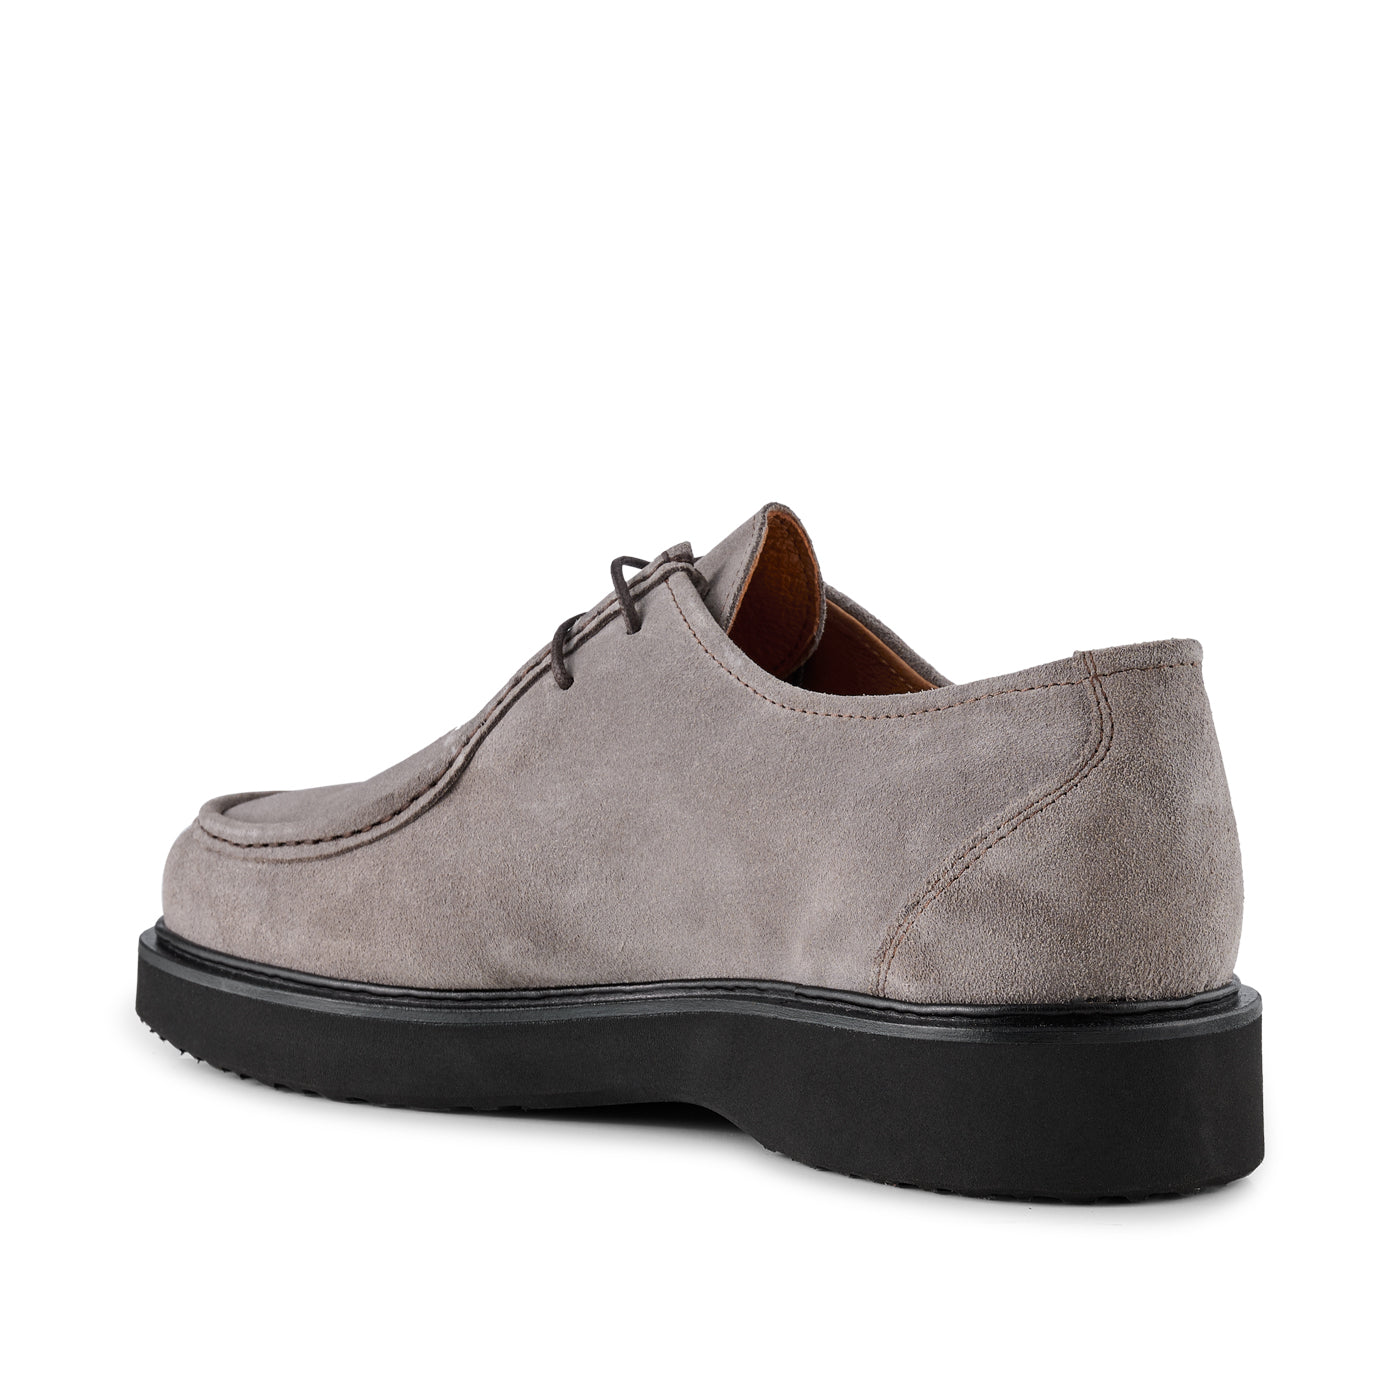 SHOE THE BEAR MENS Cosmos apron shoe suede Shoes 160 TAUPE